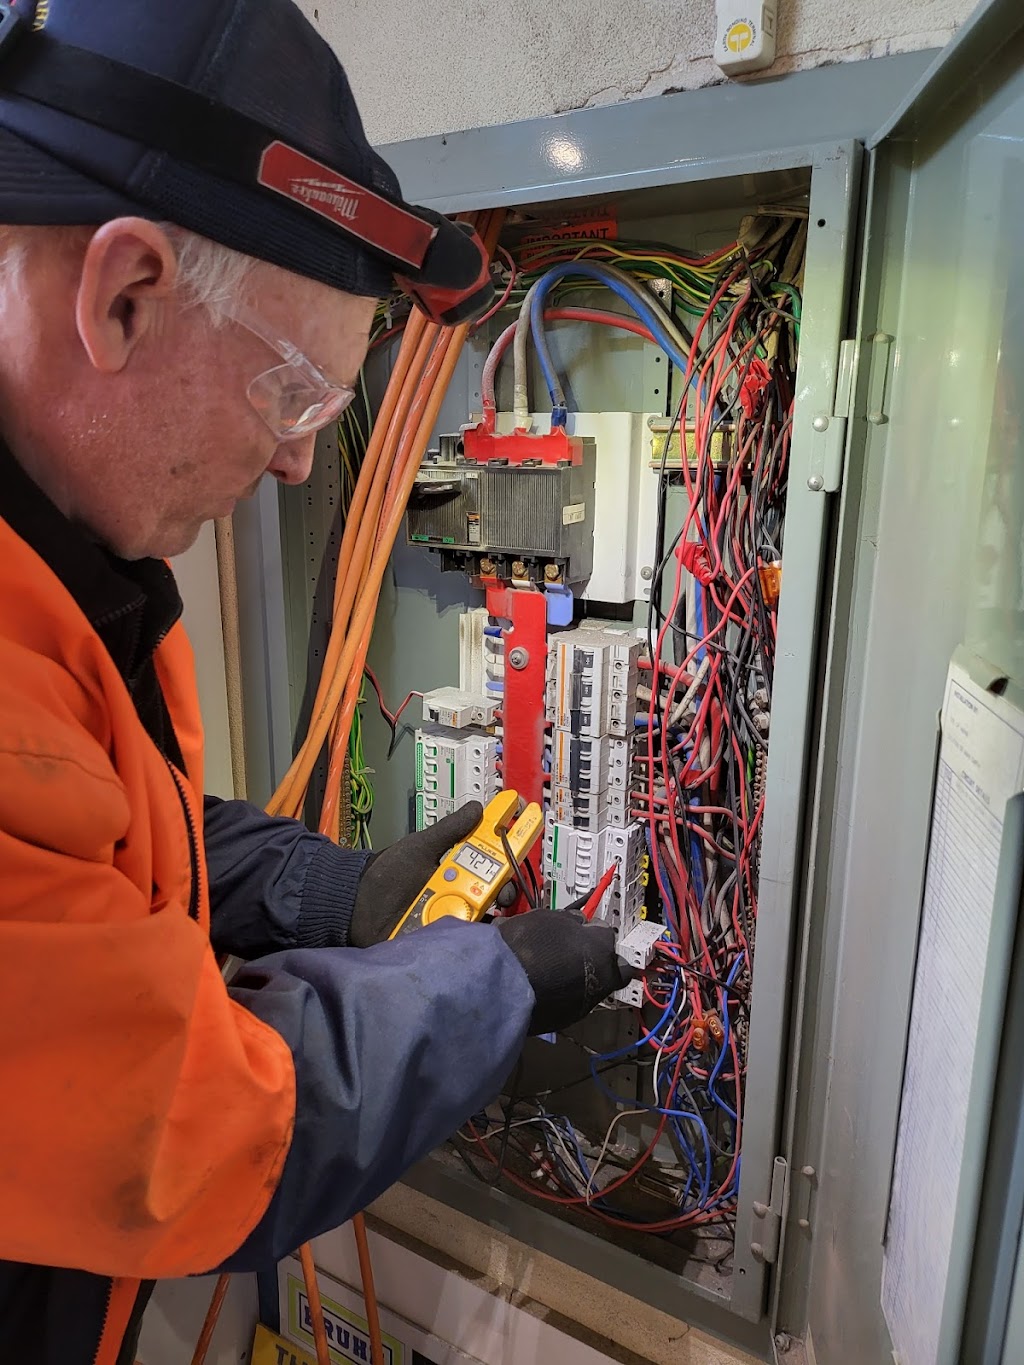 Eden Grace Electrical Contractor Mt Gambier | electrician | 9 Kennedy Ave, Mount Gambier SA 5290, Australia | 0411812788 OR +61 411 812 788